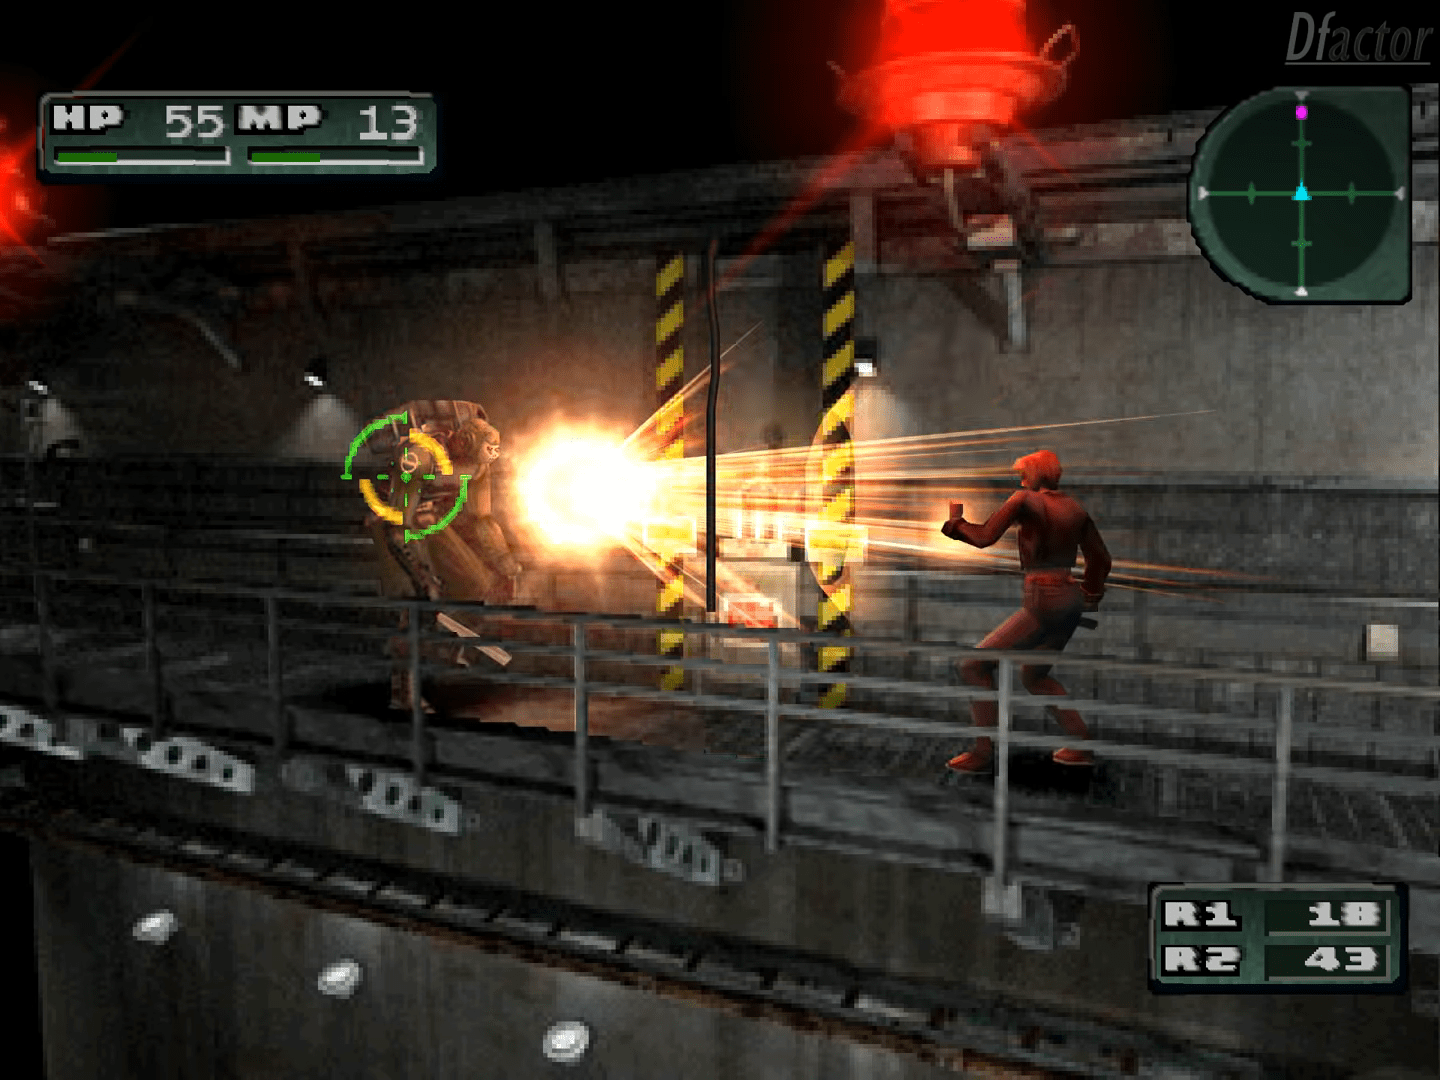 parasite eve 2 iso disc 2